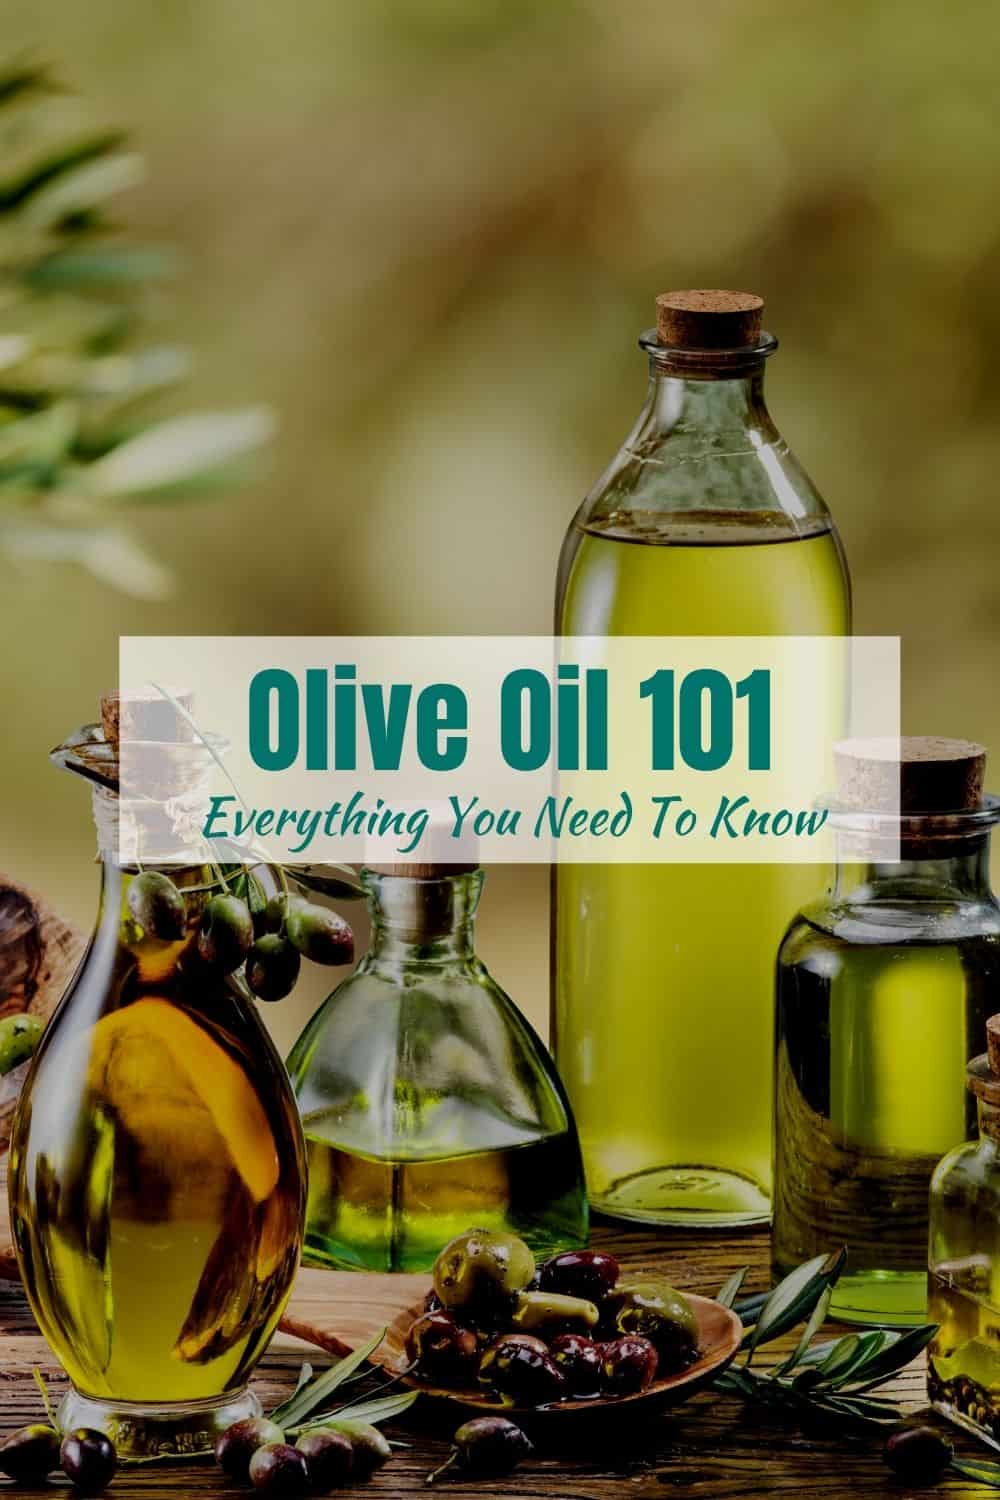 Oil olive What is